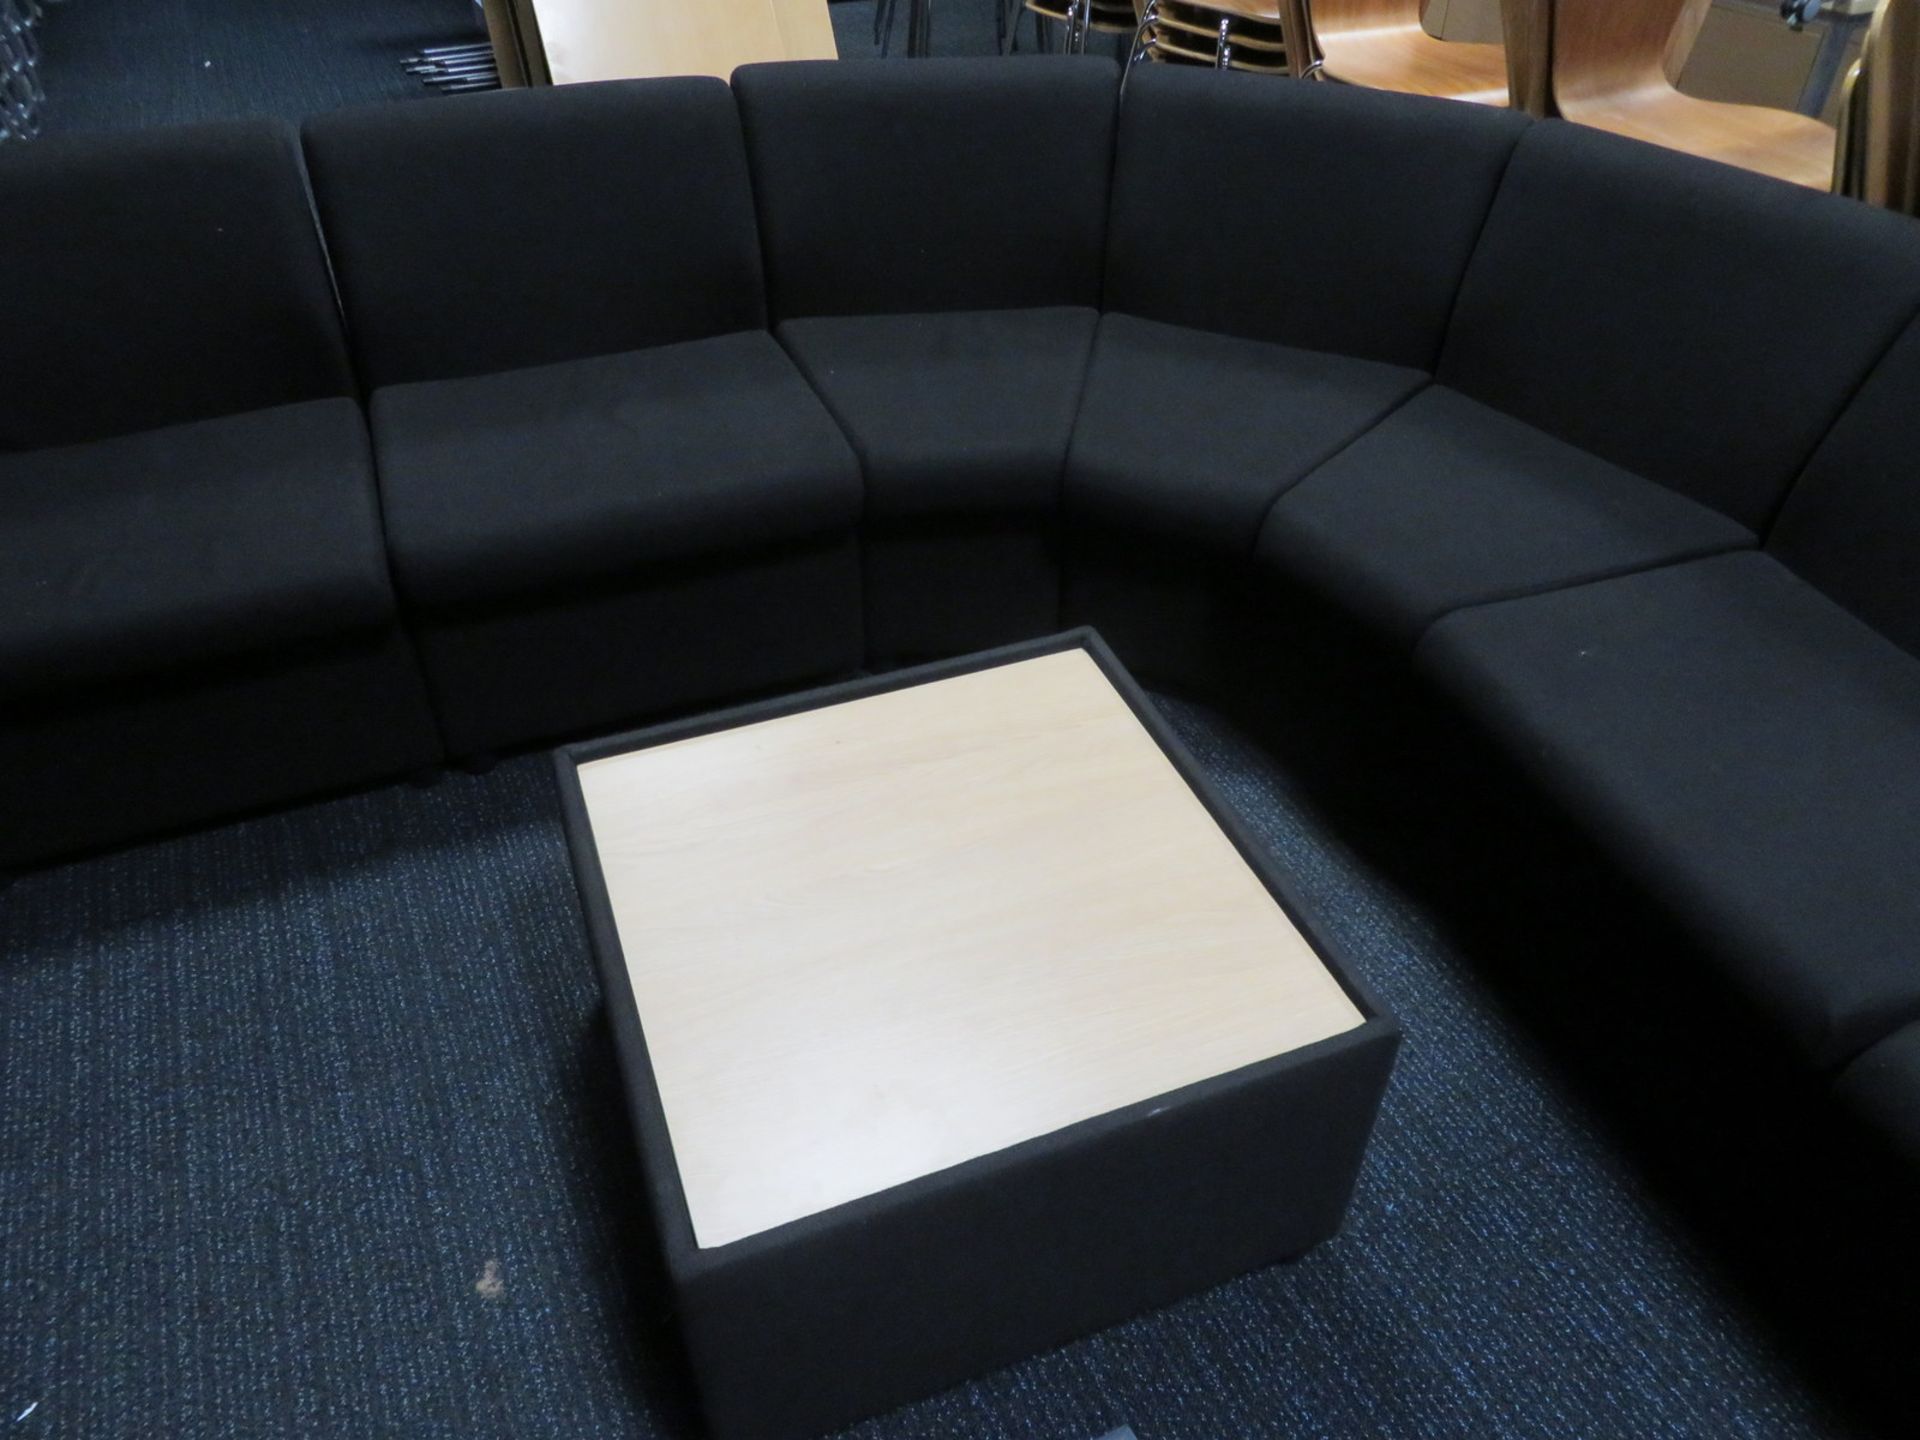 Waiting Room Corner Sofa With Coffee Table. Dimensions: 2000x2000mm (LxL) - Image 2 of 3